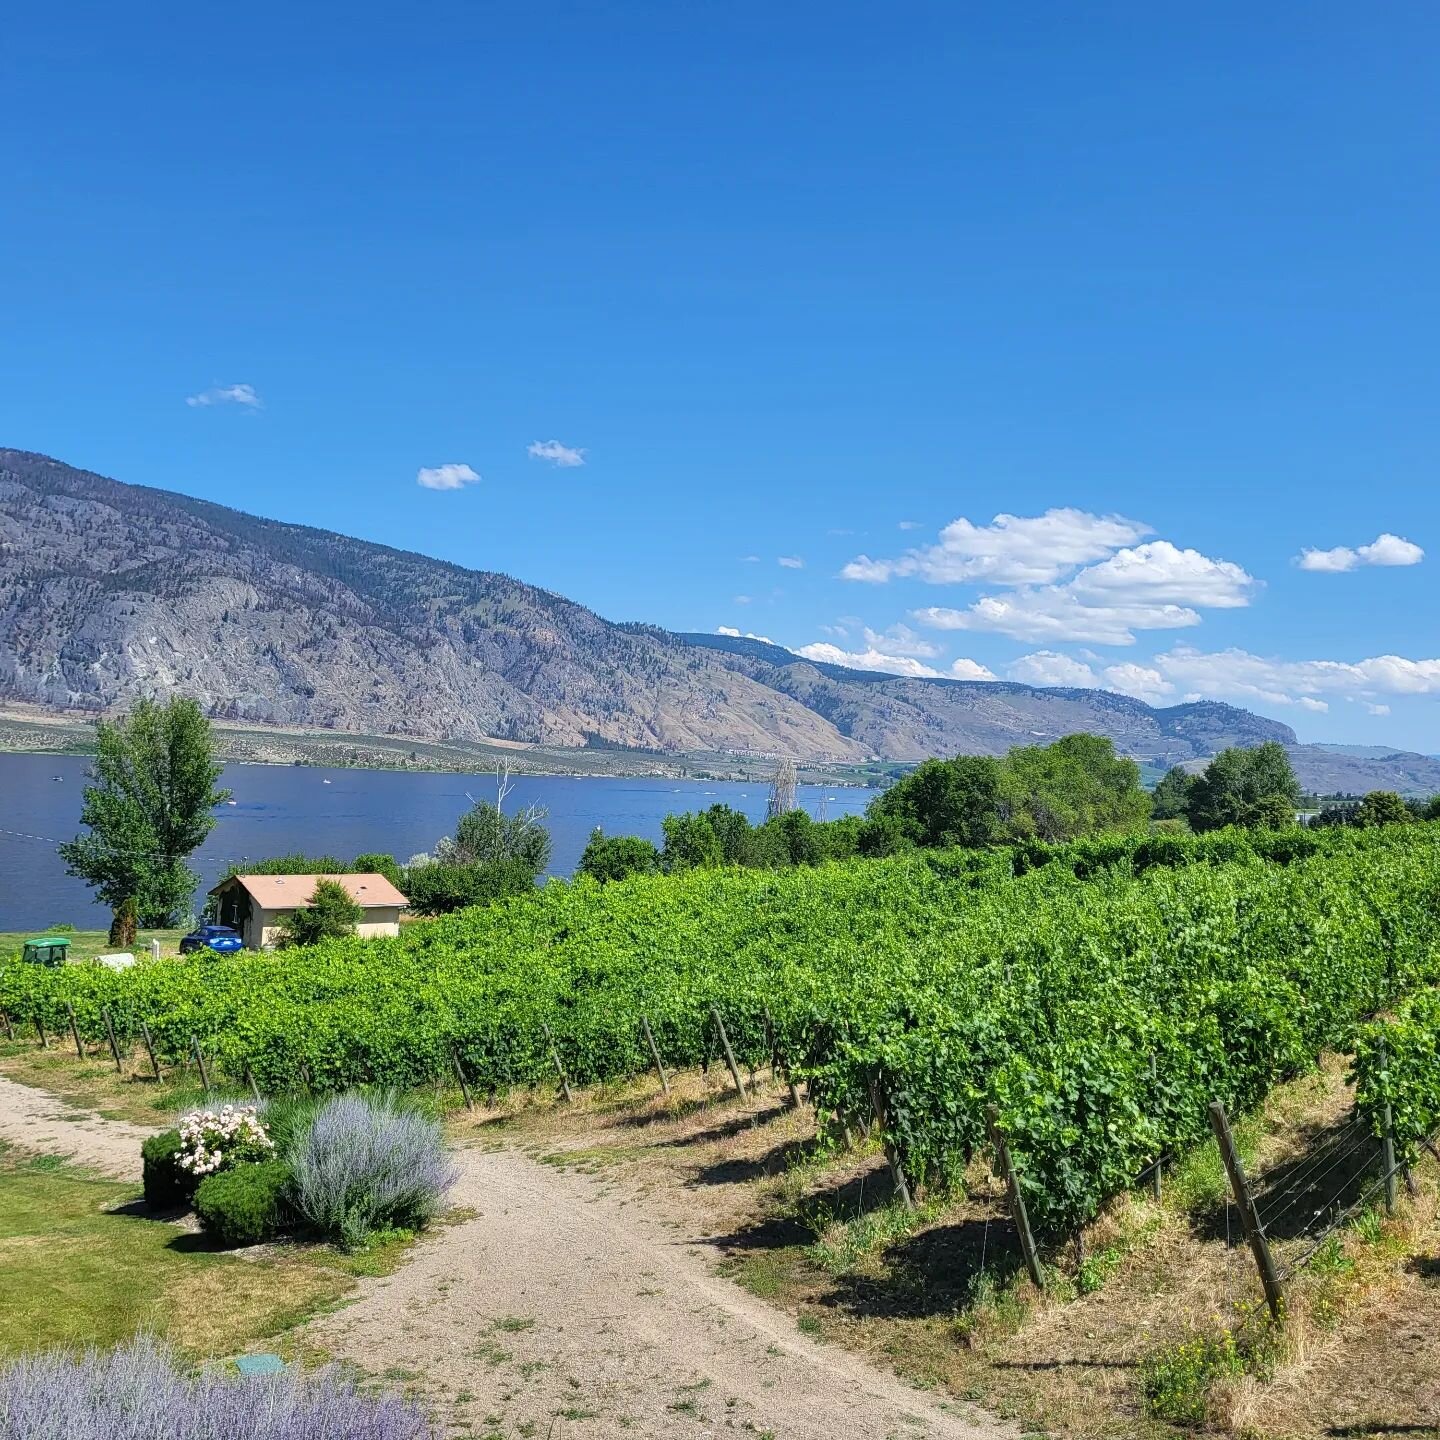 Views from La Stella Winery 😎
@lastellawinery thank you for such an informative tasting. 
#winetour #winetourism #bcwine #uniqueblendtours #uniqueexperience #southokanagan #osoyooswines #osoyooslake #osoyoosbc #wineguide #lakeviews #vineyardviews #b